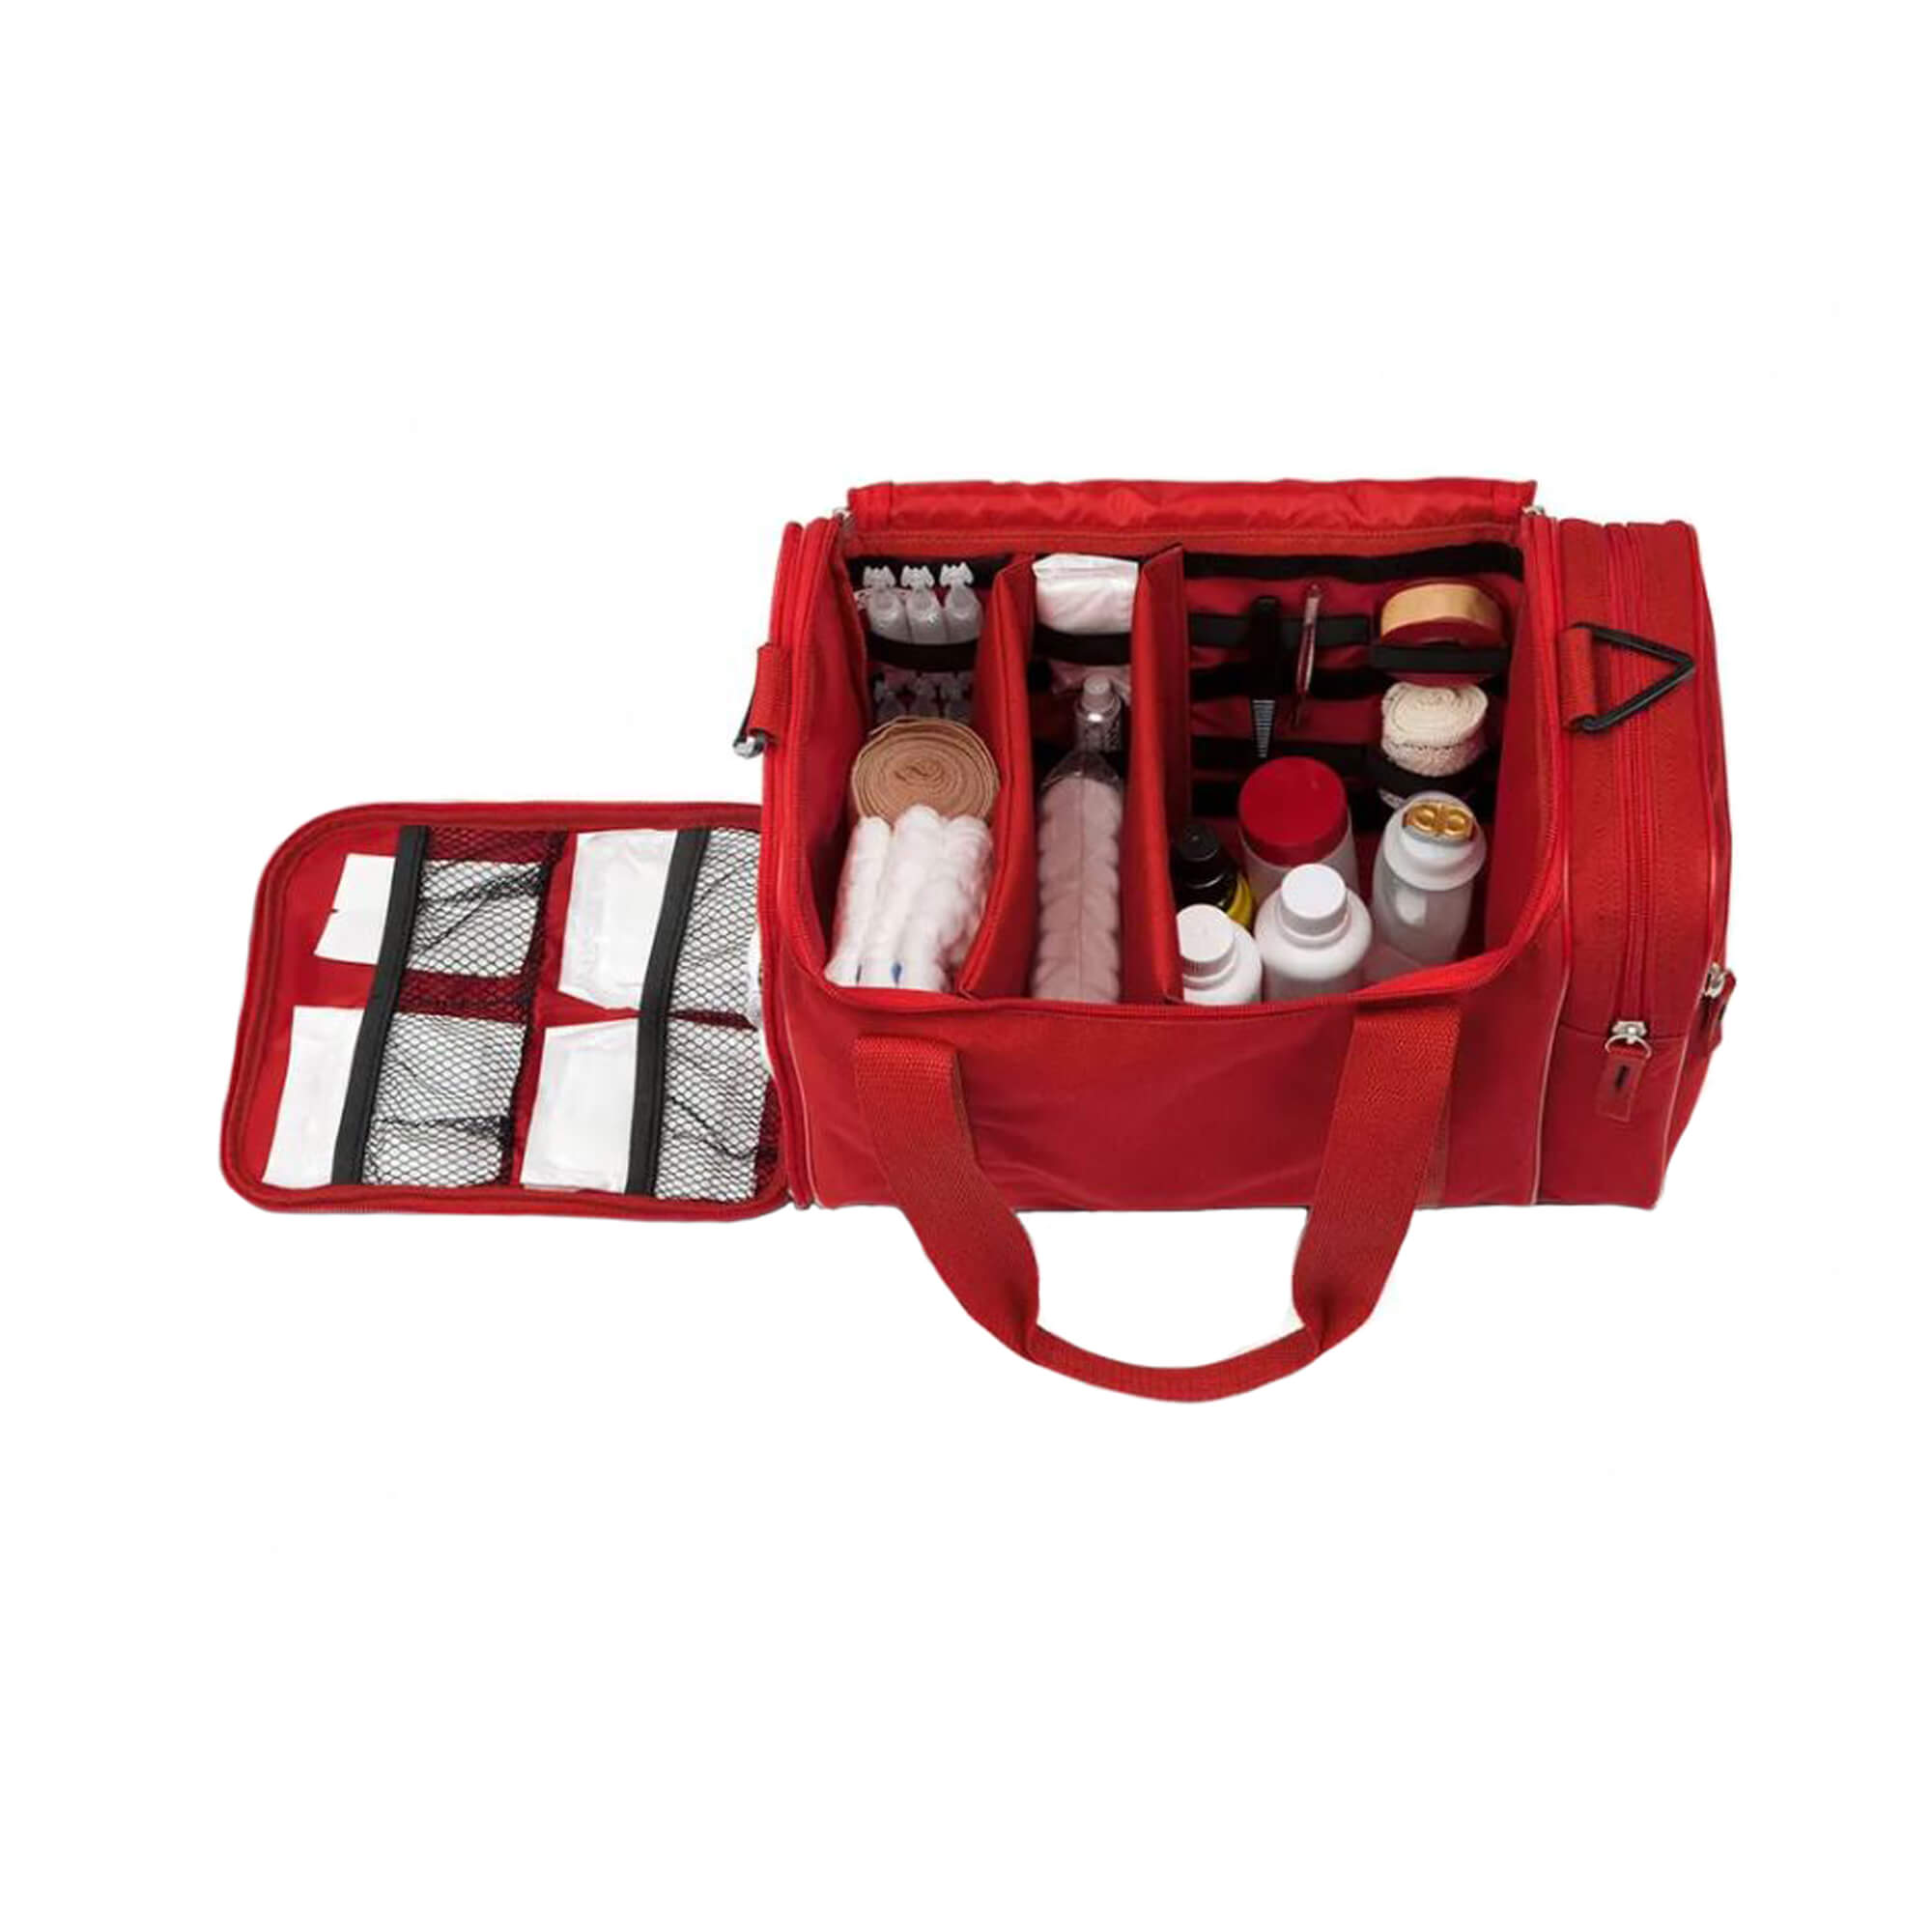 first aid kit with bag and medical equipment